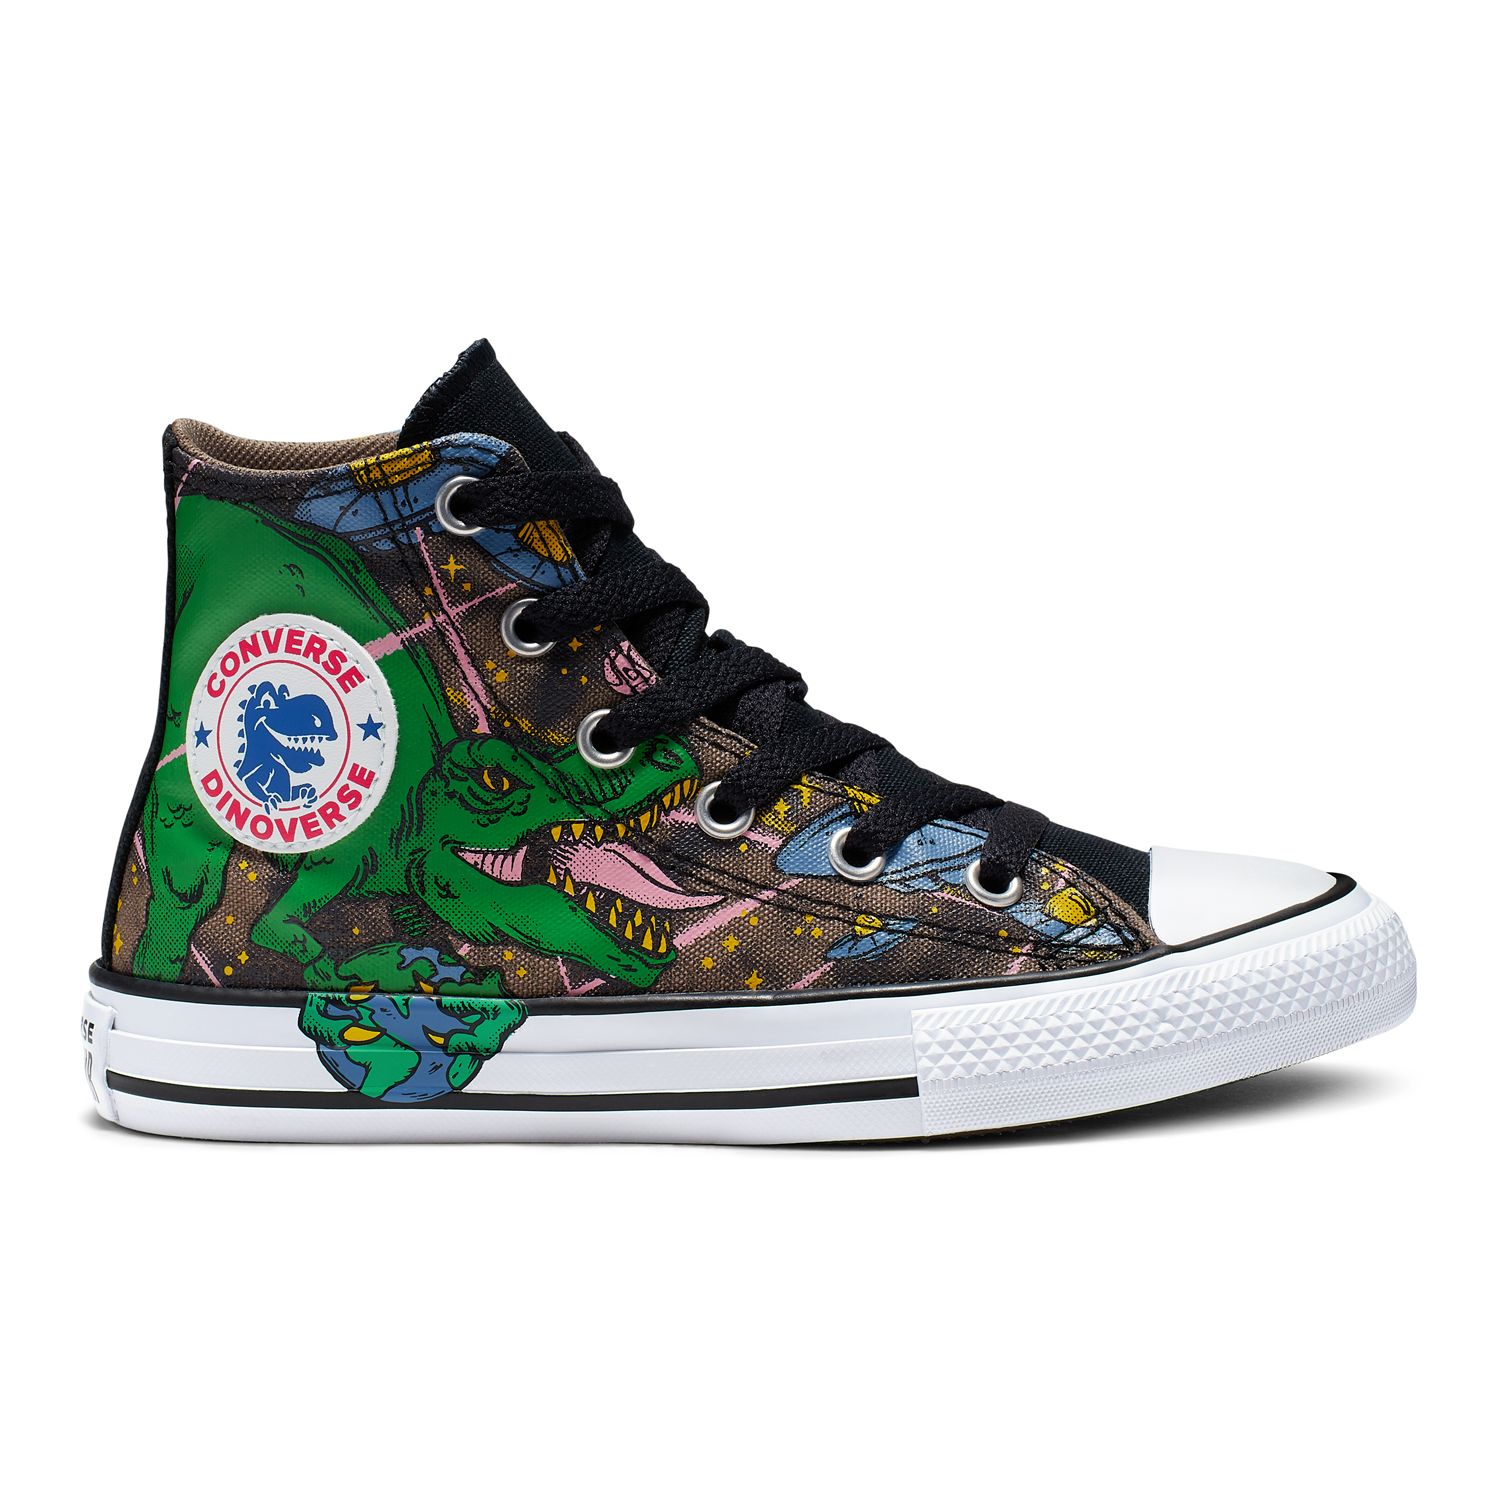 converse dinosaur shoes for adults